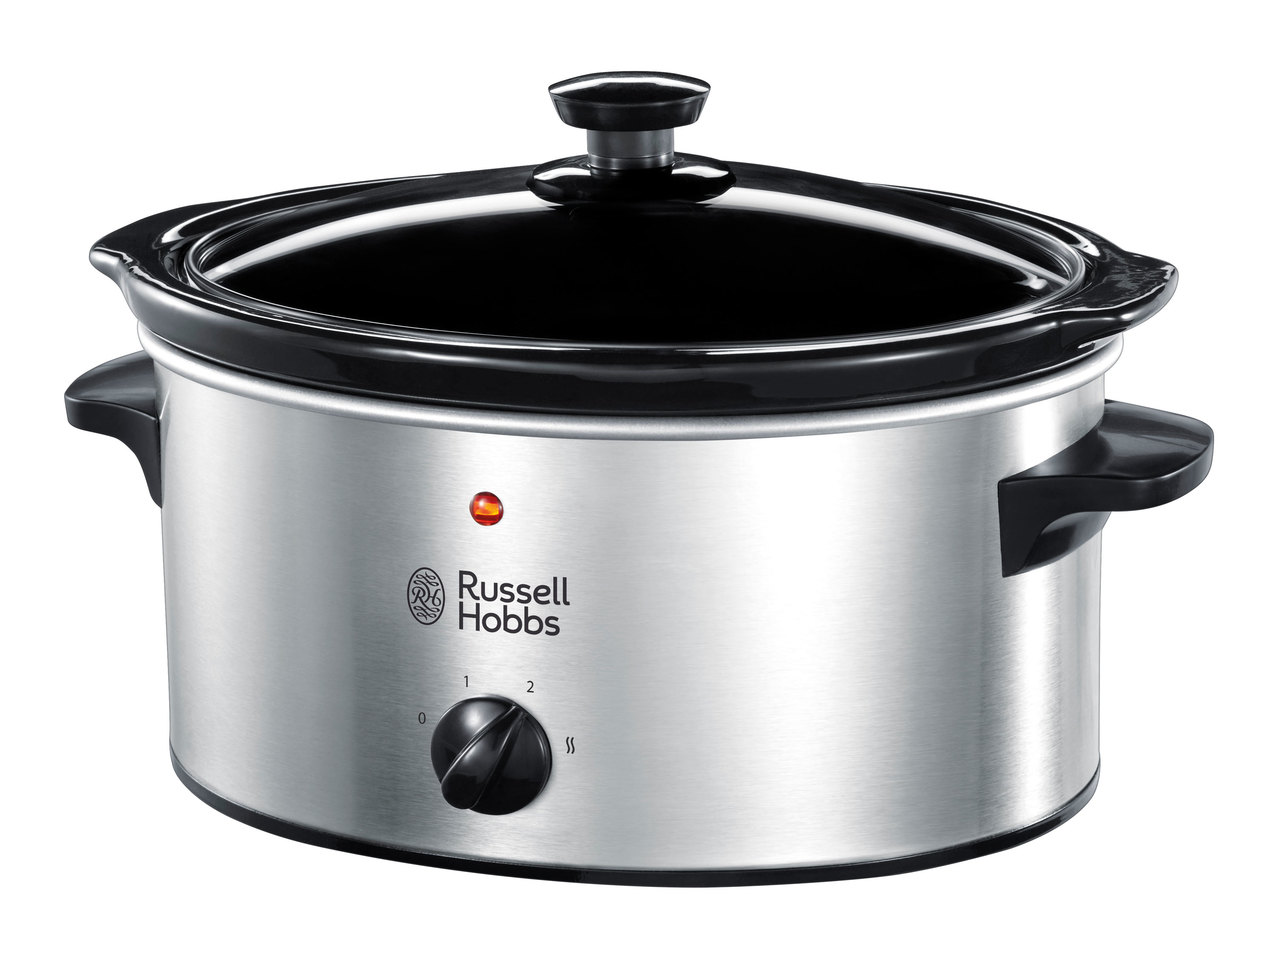 Russell Hobbs 3.5L Slow Cooker1